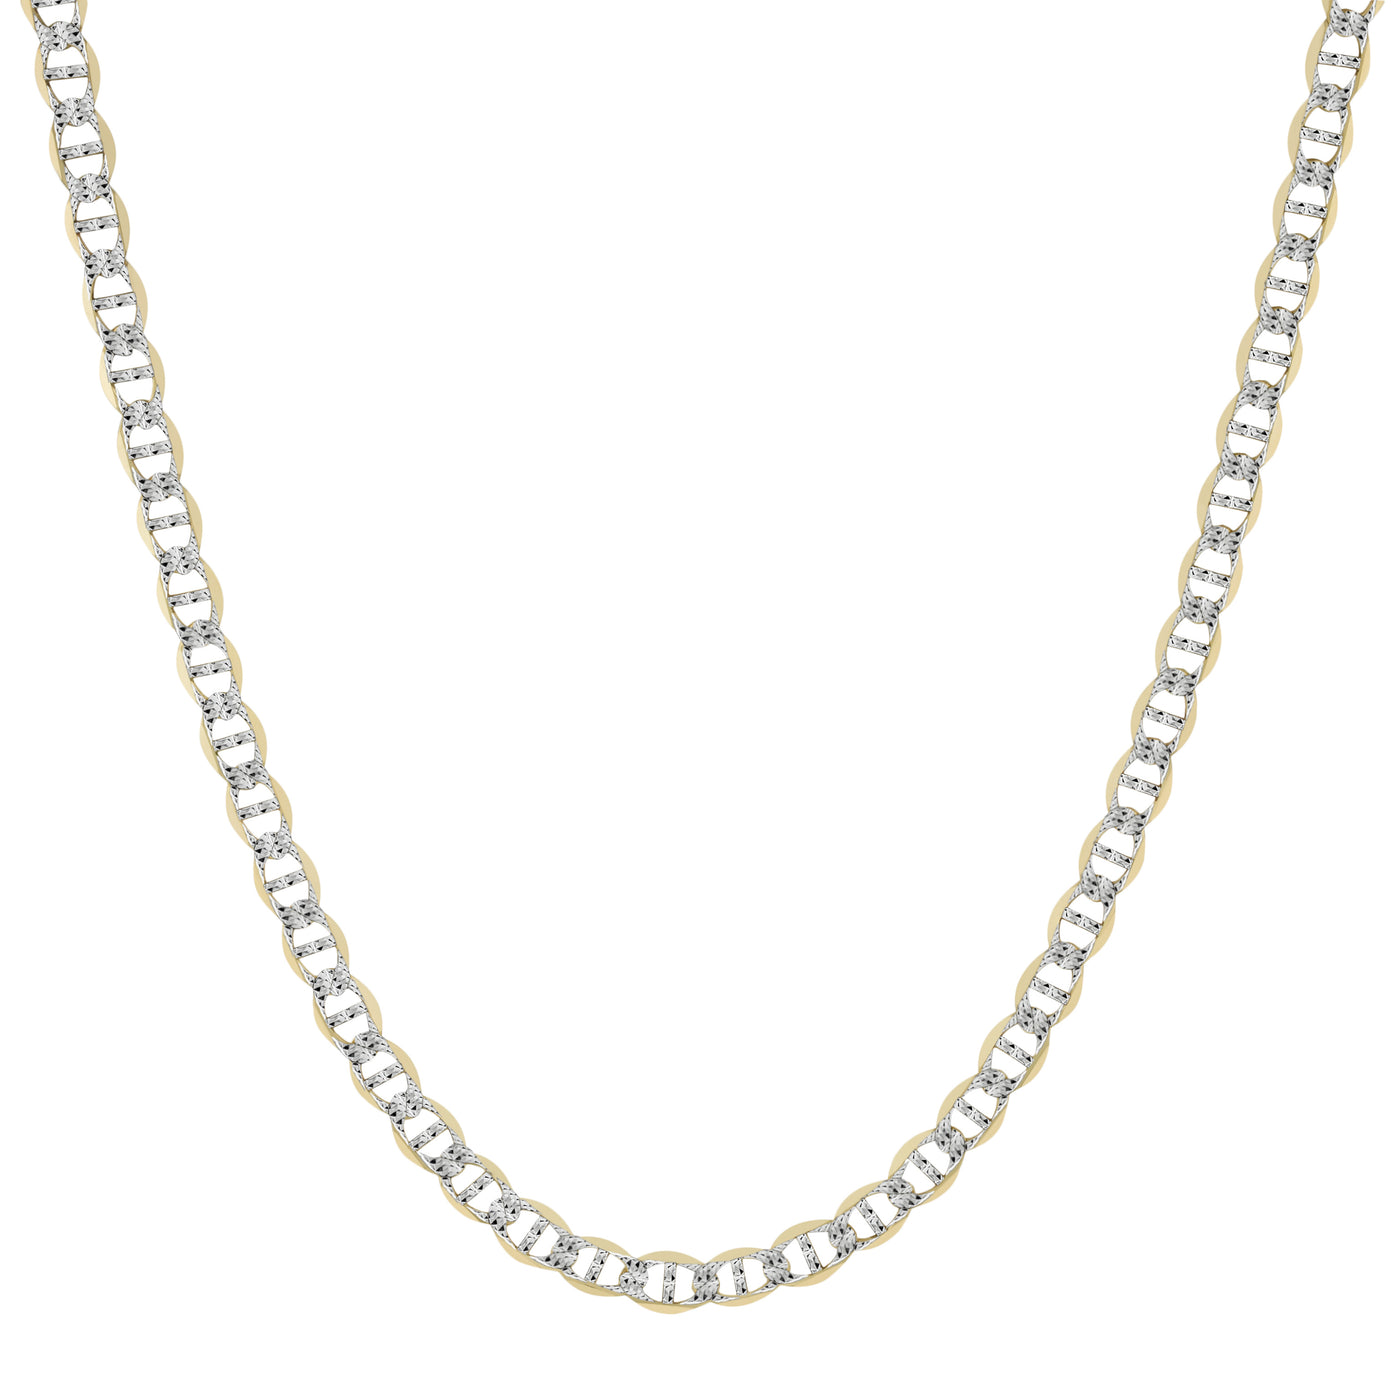 Pave Mariner Link Chain Necklace 10K & 14K Yellow White Gold - Solid